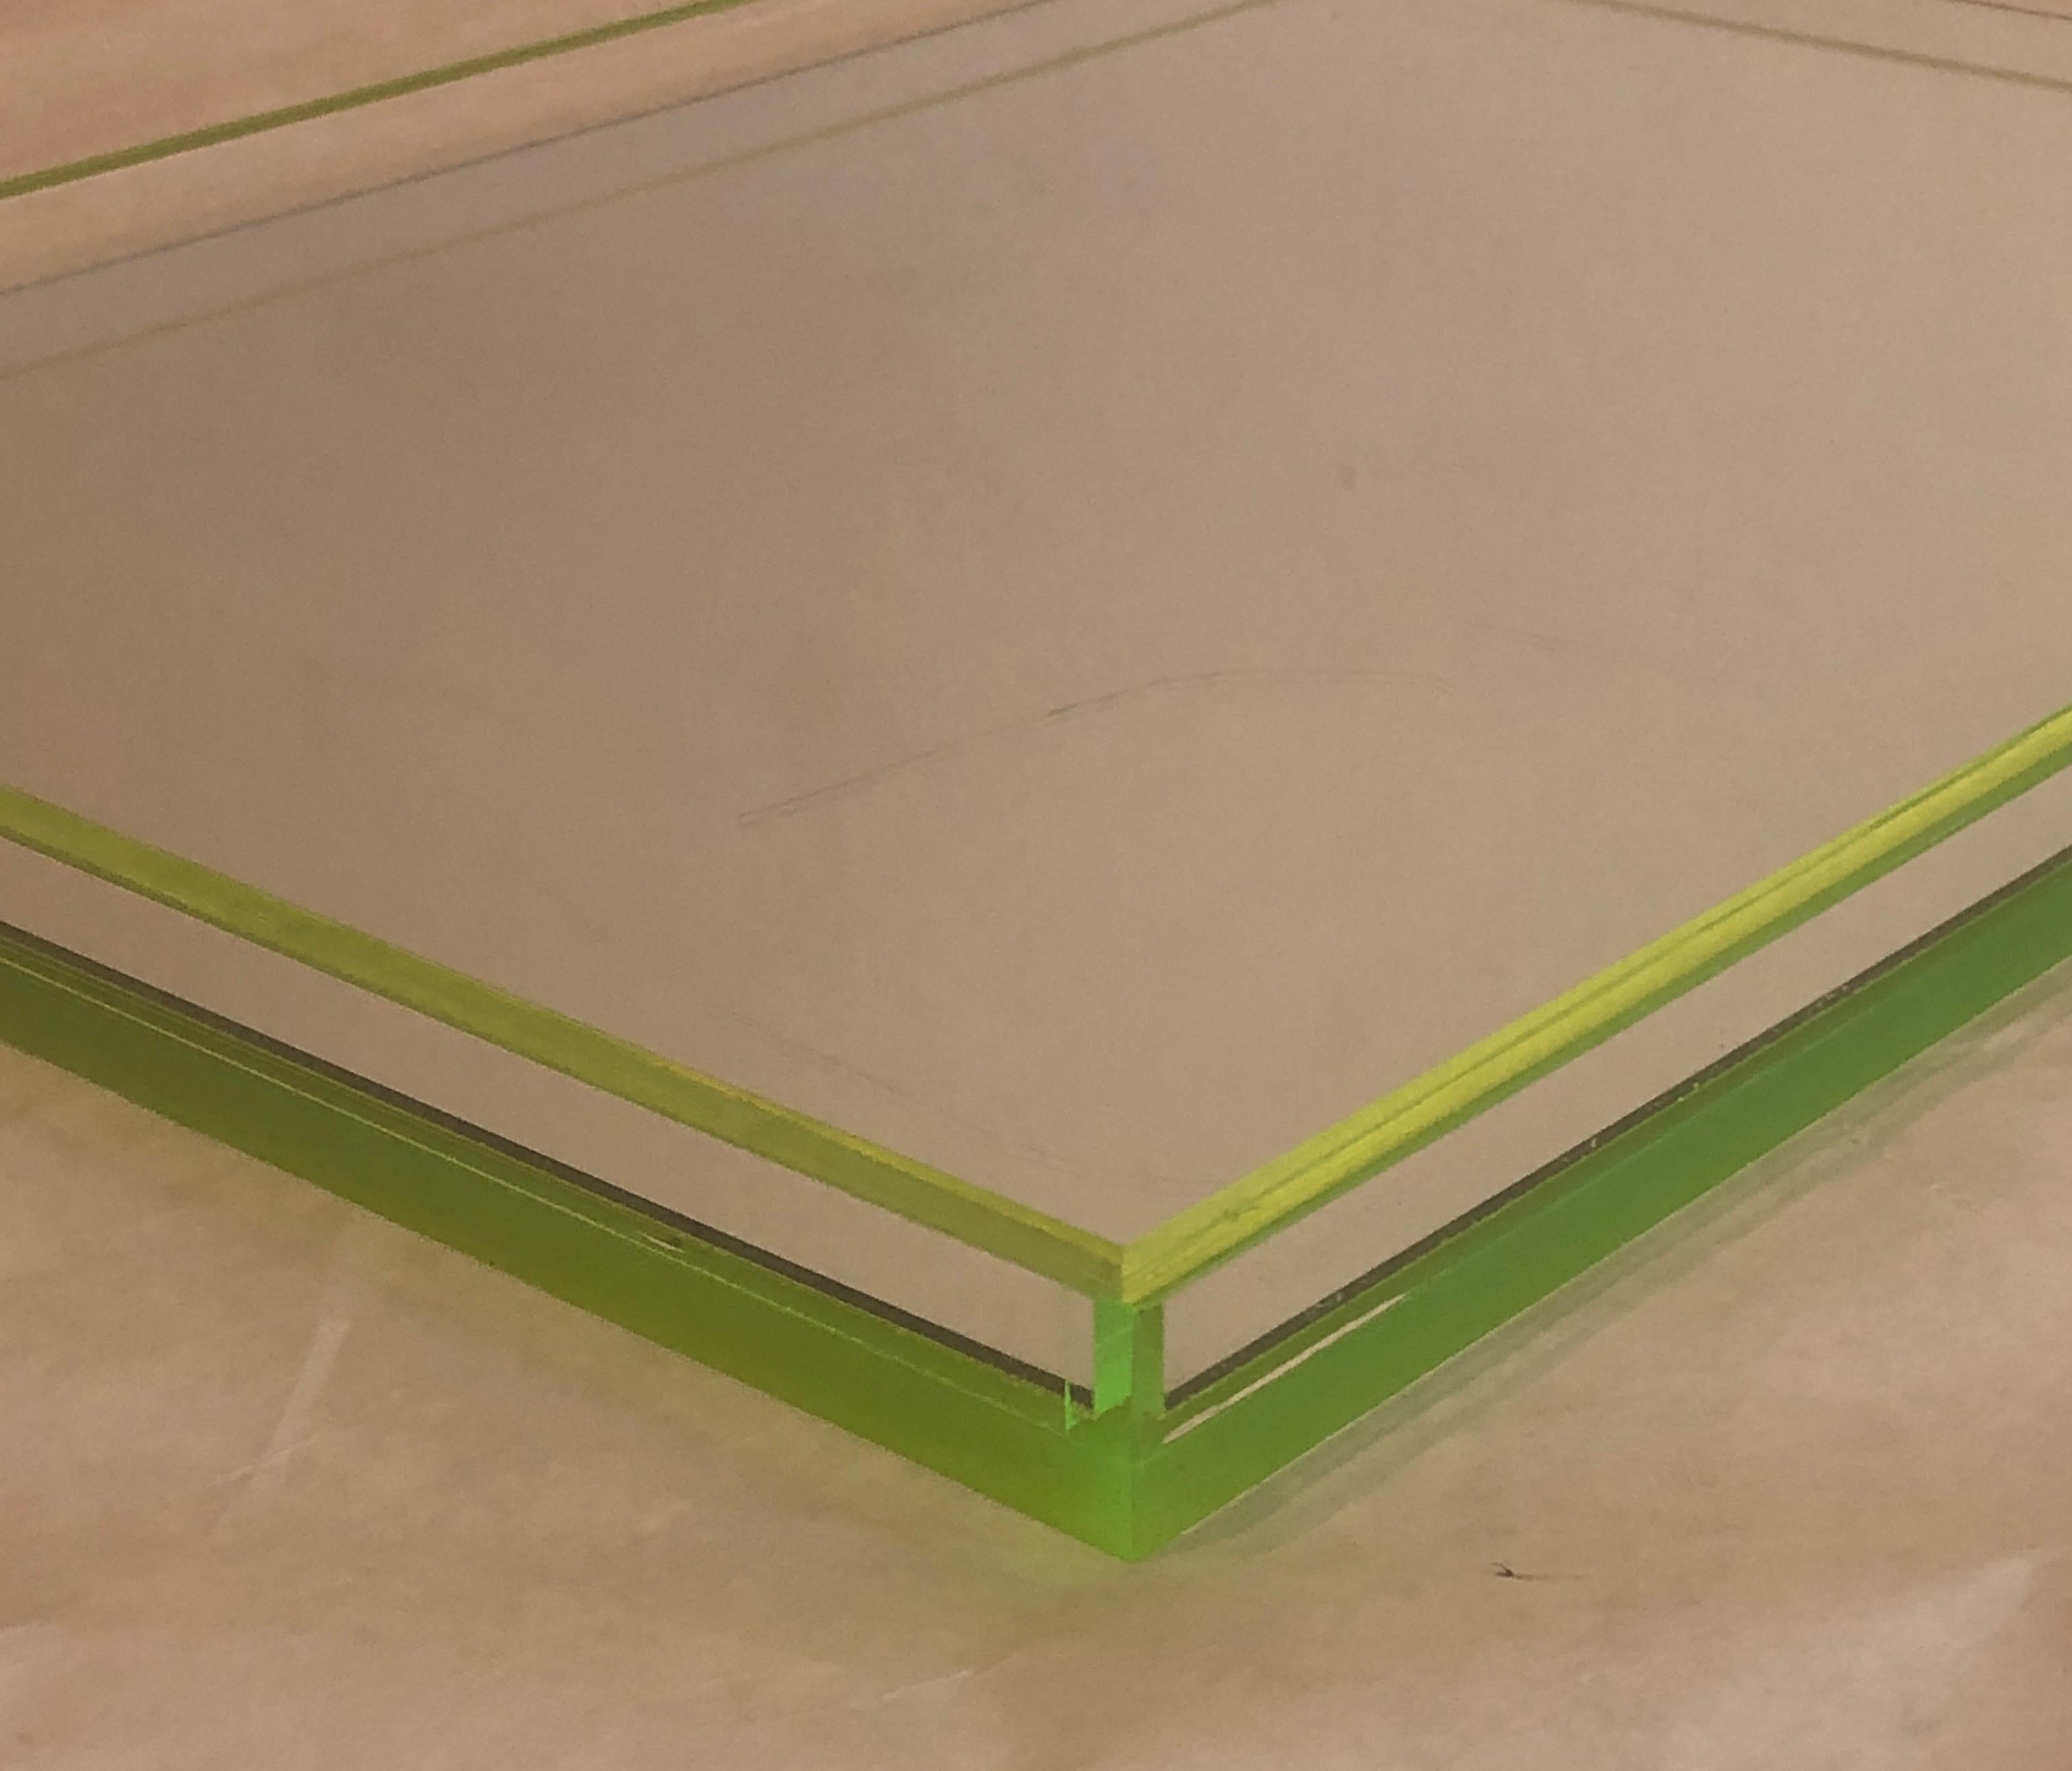 Tinsley Mortimer Clear Lucite, Neon Green Accents and Mirror Cocktail Ware Tray 4